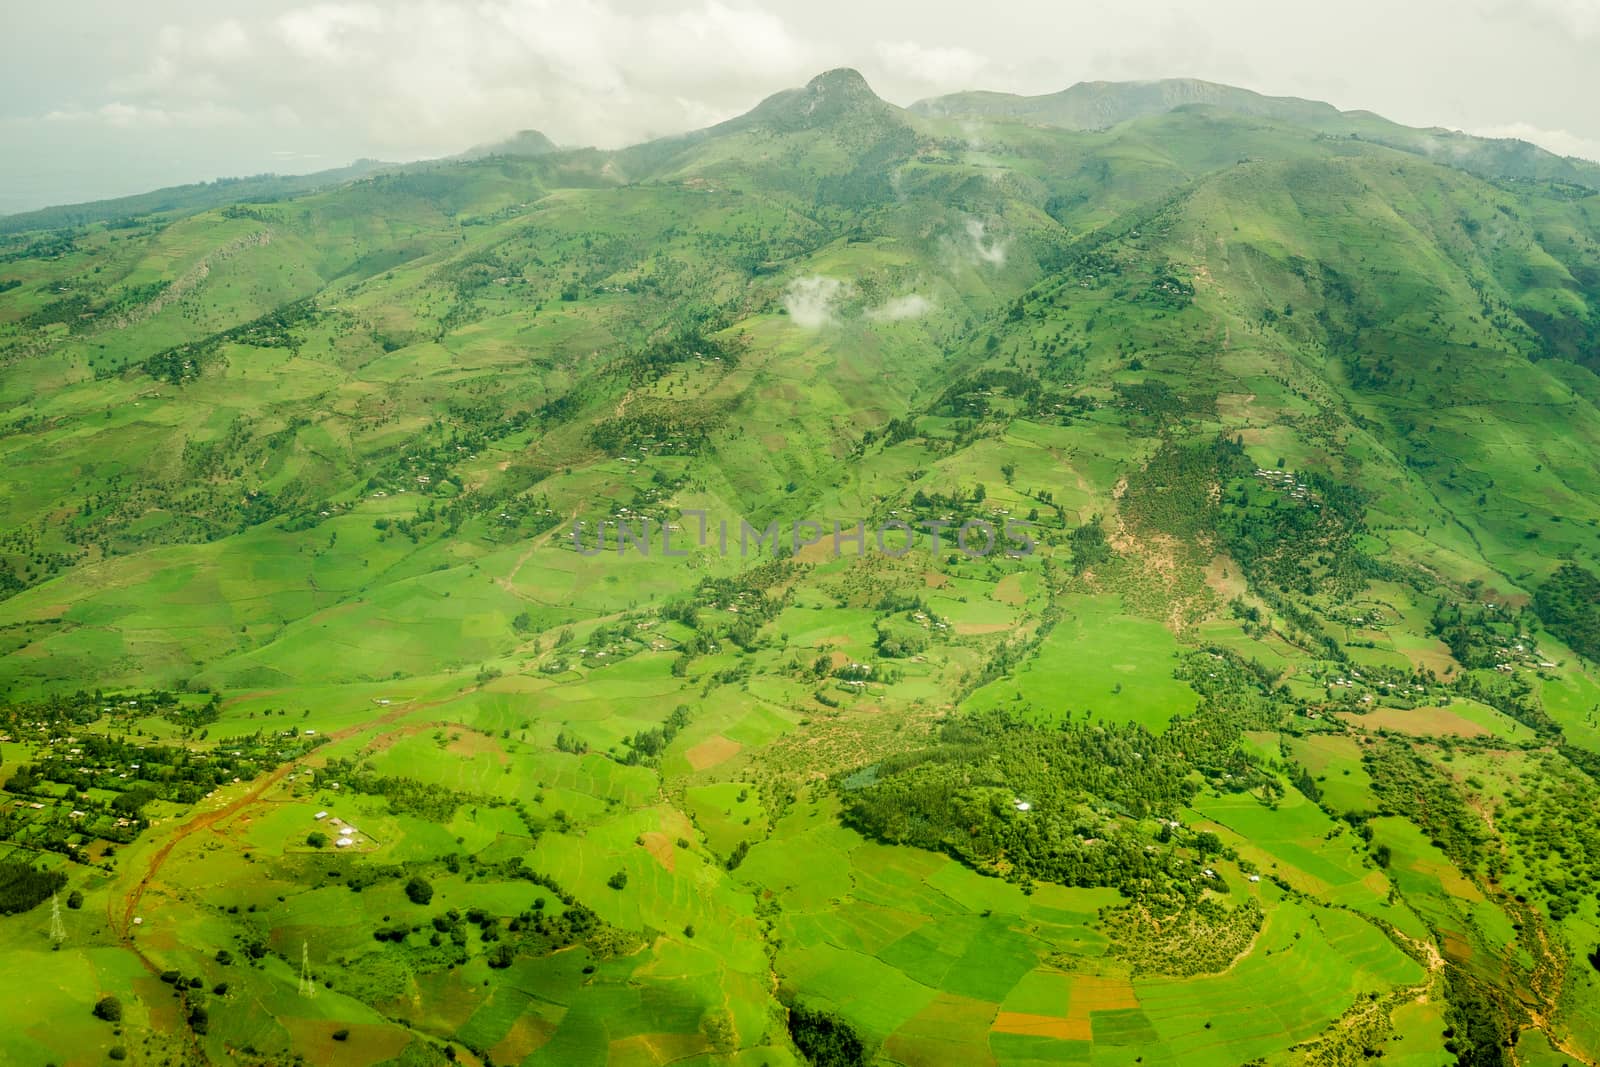 Highlands surrounding Addis Ababa by derejeb